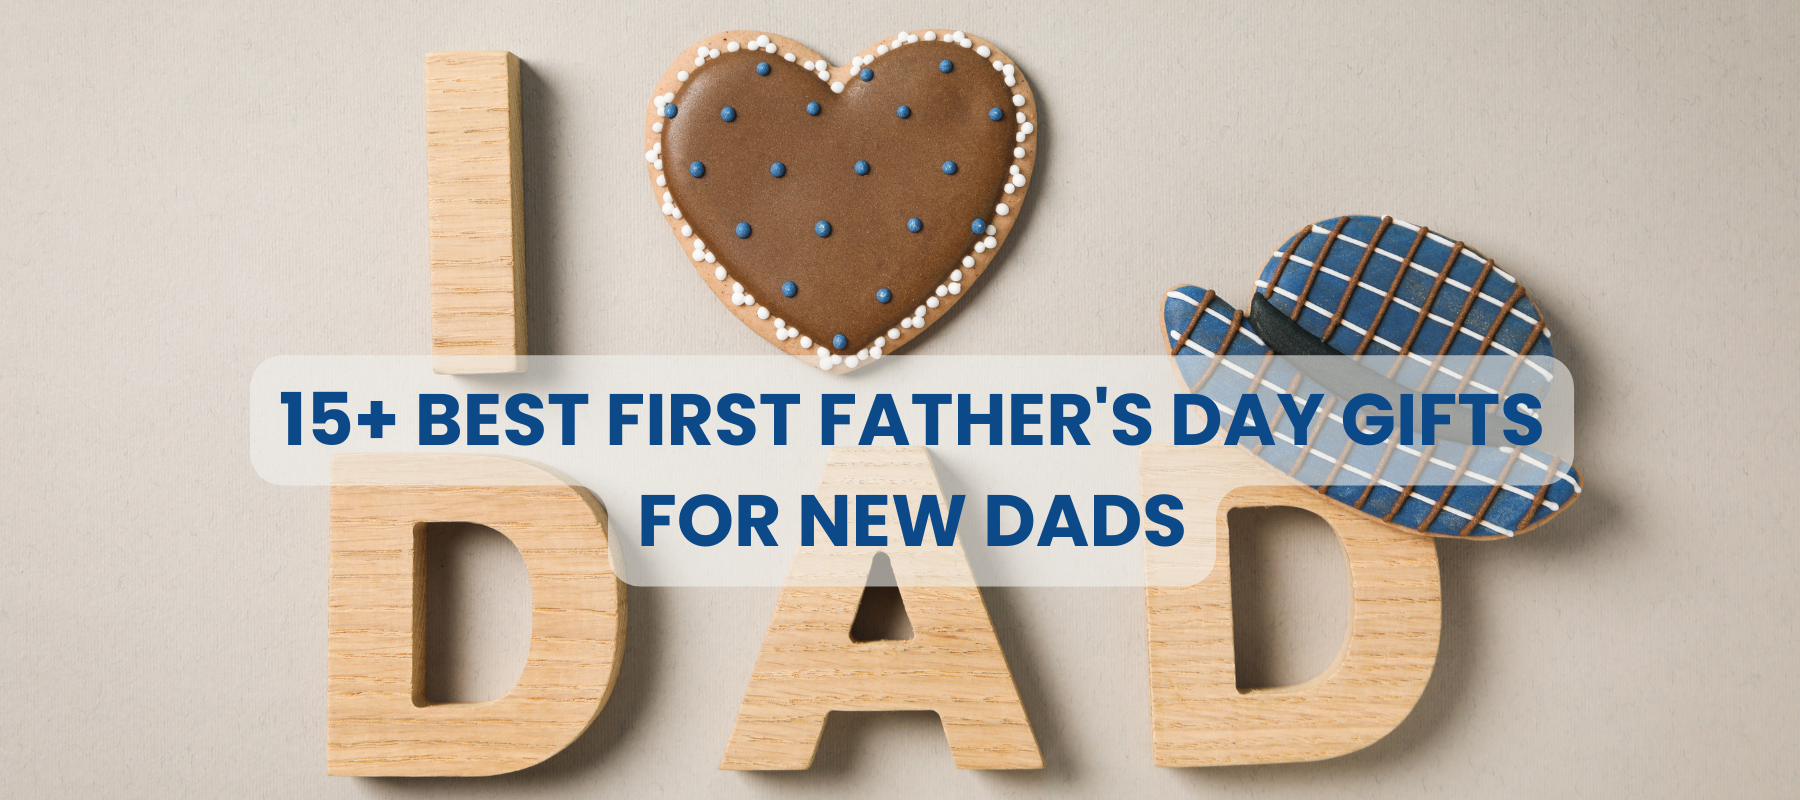 15+ Best First Father's Day Gifts for New Dads That He Will Cherish